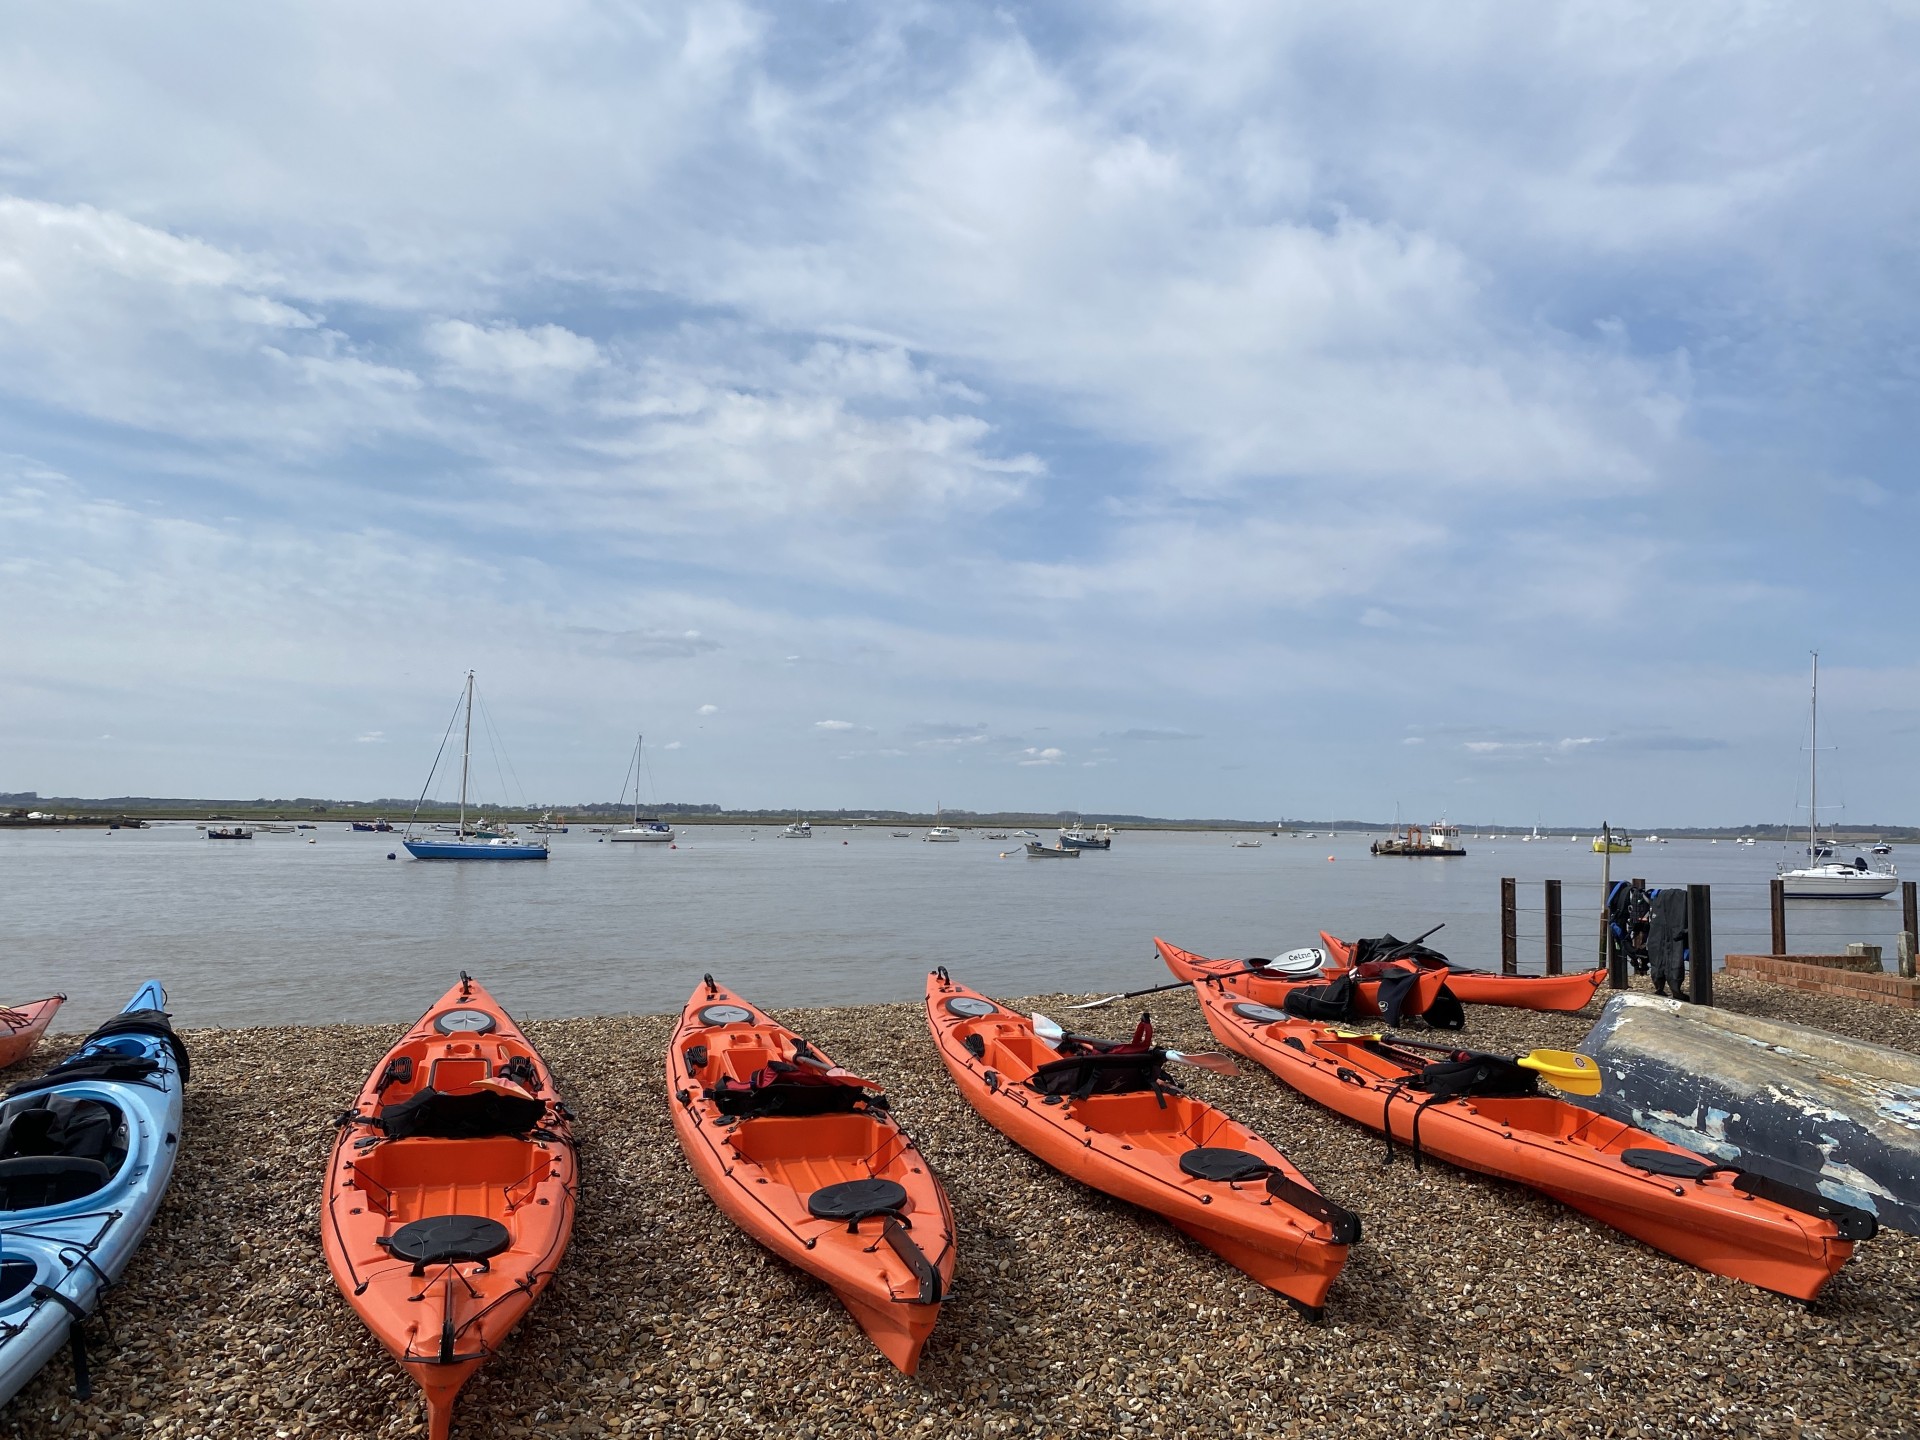 Orange sit-on-top kayaks lined up on the shingle beach at Bawdsey Quay ready to launch on the 'Discover the Deben Kayaking Trip'.